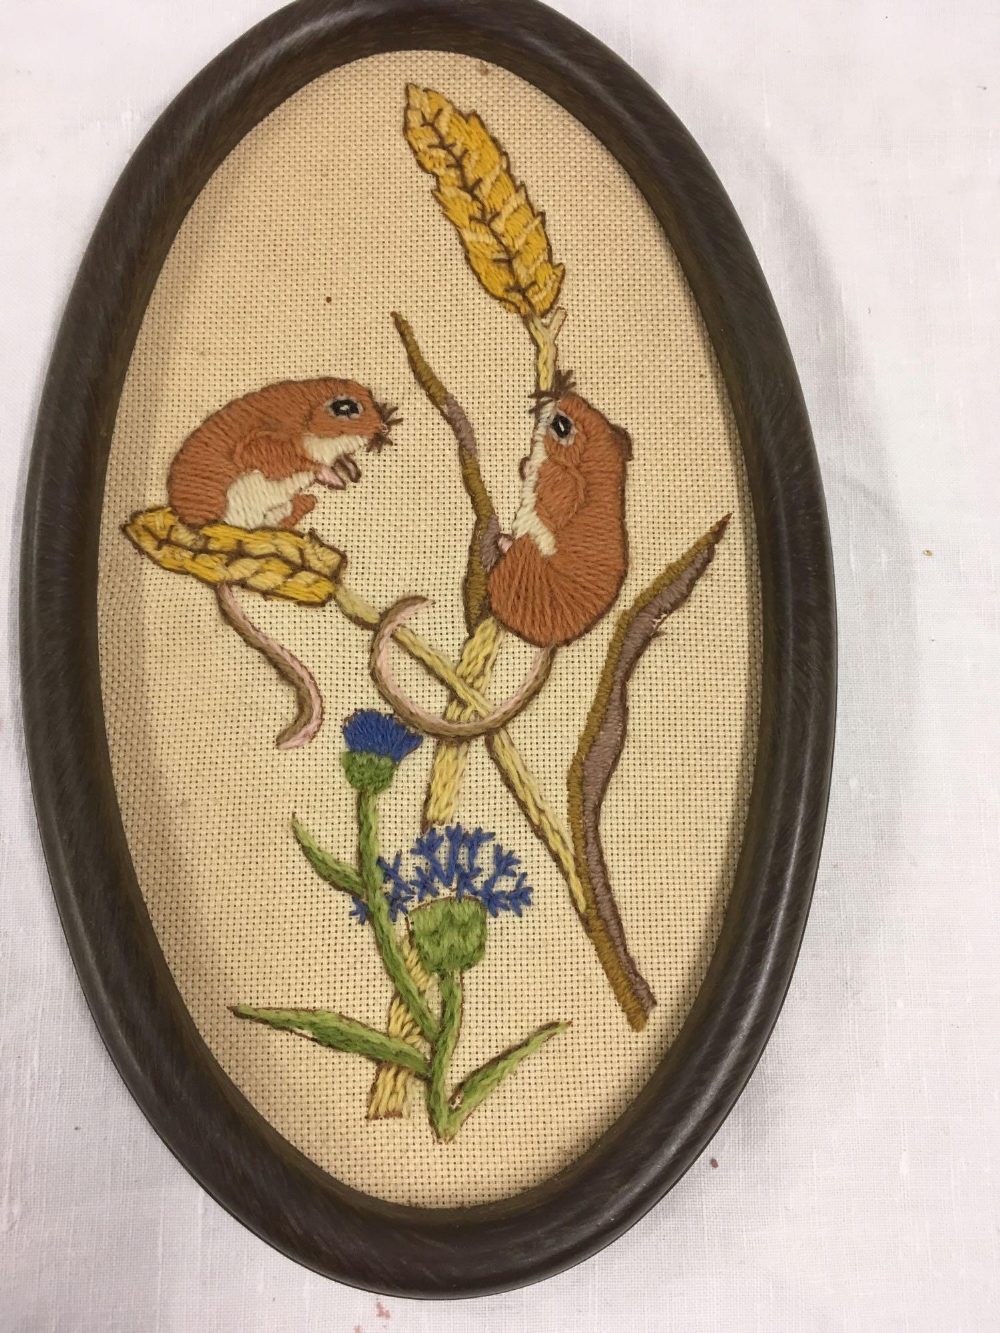 UNFRAMED ORIENTAL SILK THREAD PICTURE OF 2 GIRLS TOGETHER WITH AN OVAL WOOL-WORK OF HARVEST MICE - Image 3 of 3